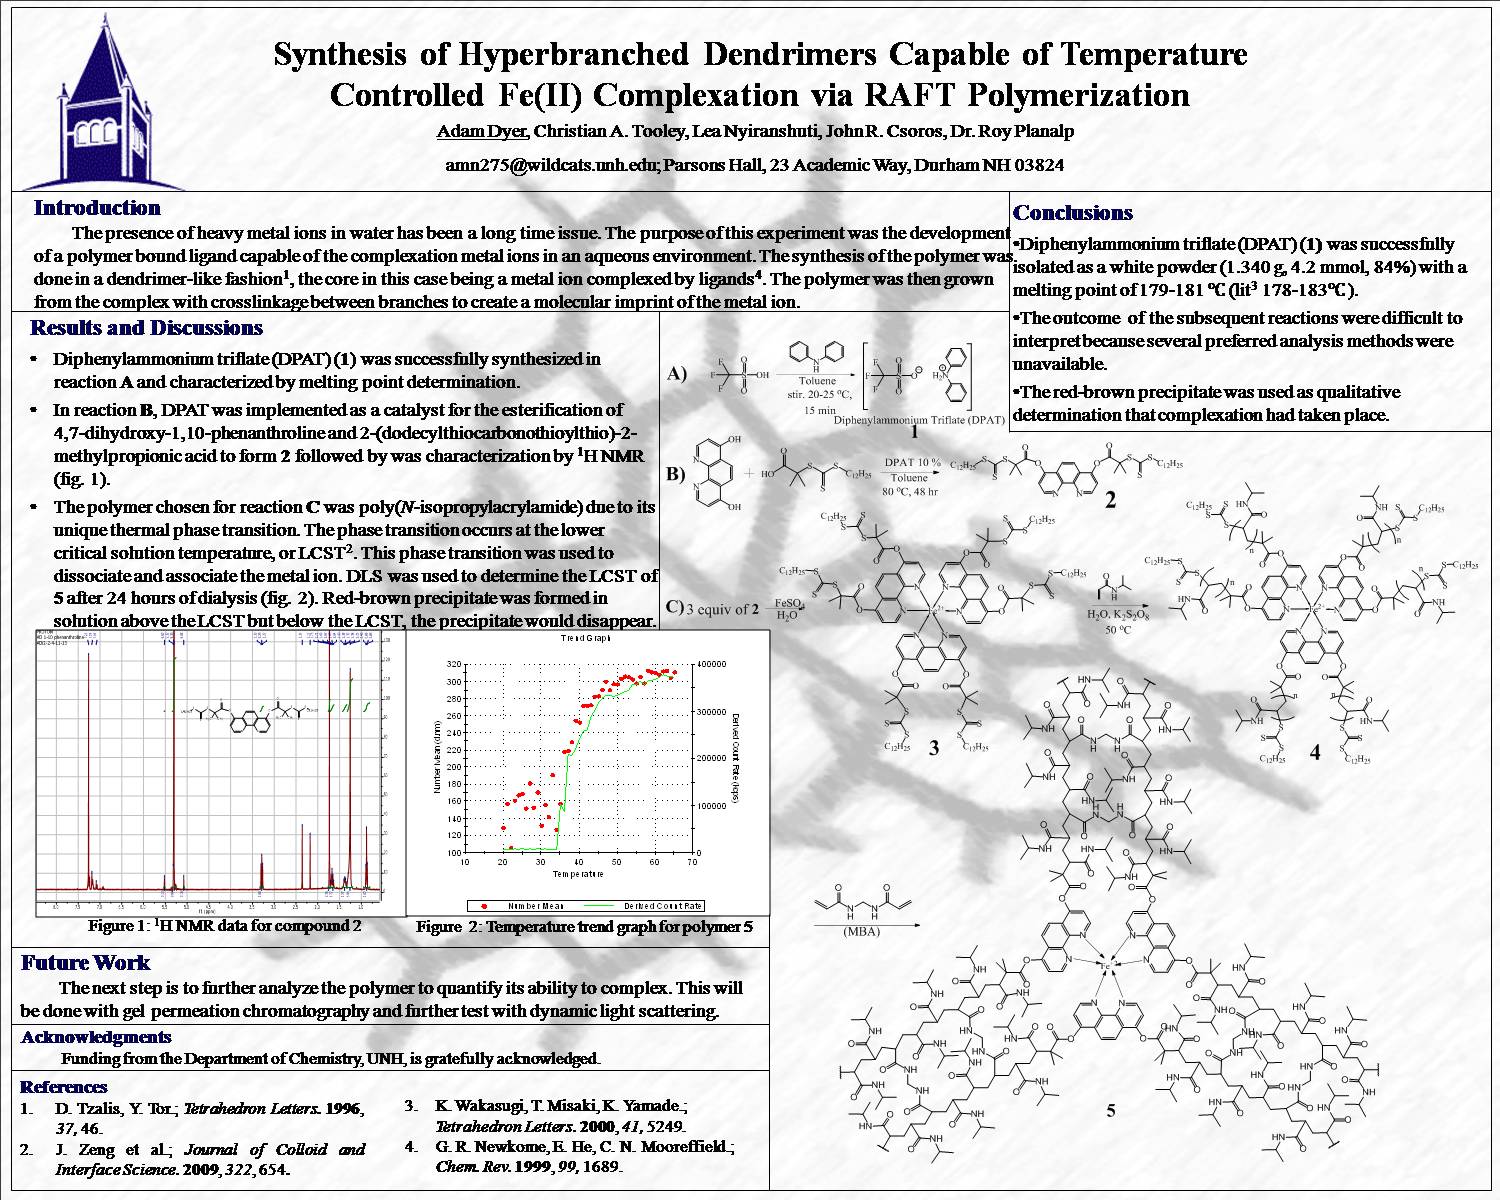 Synthesis Of Hyperbranched Dendrimers Capable Of Temperature Controlled Fe(Ii) Complexation Via Raft Polymerization  by amn275